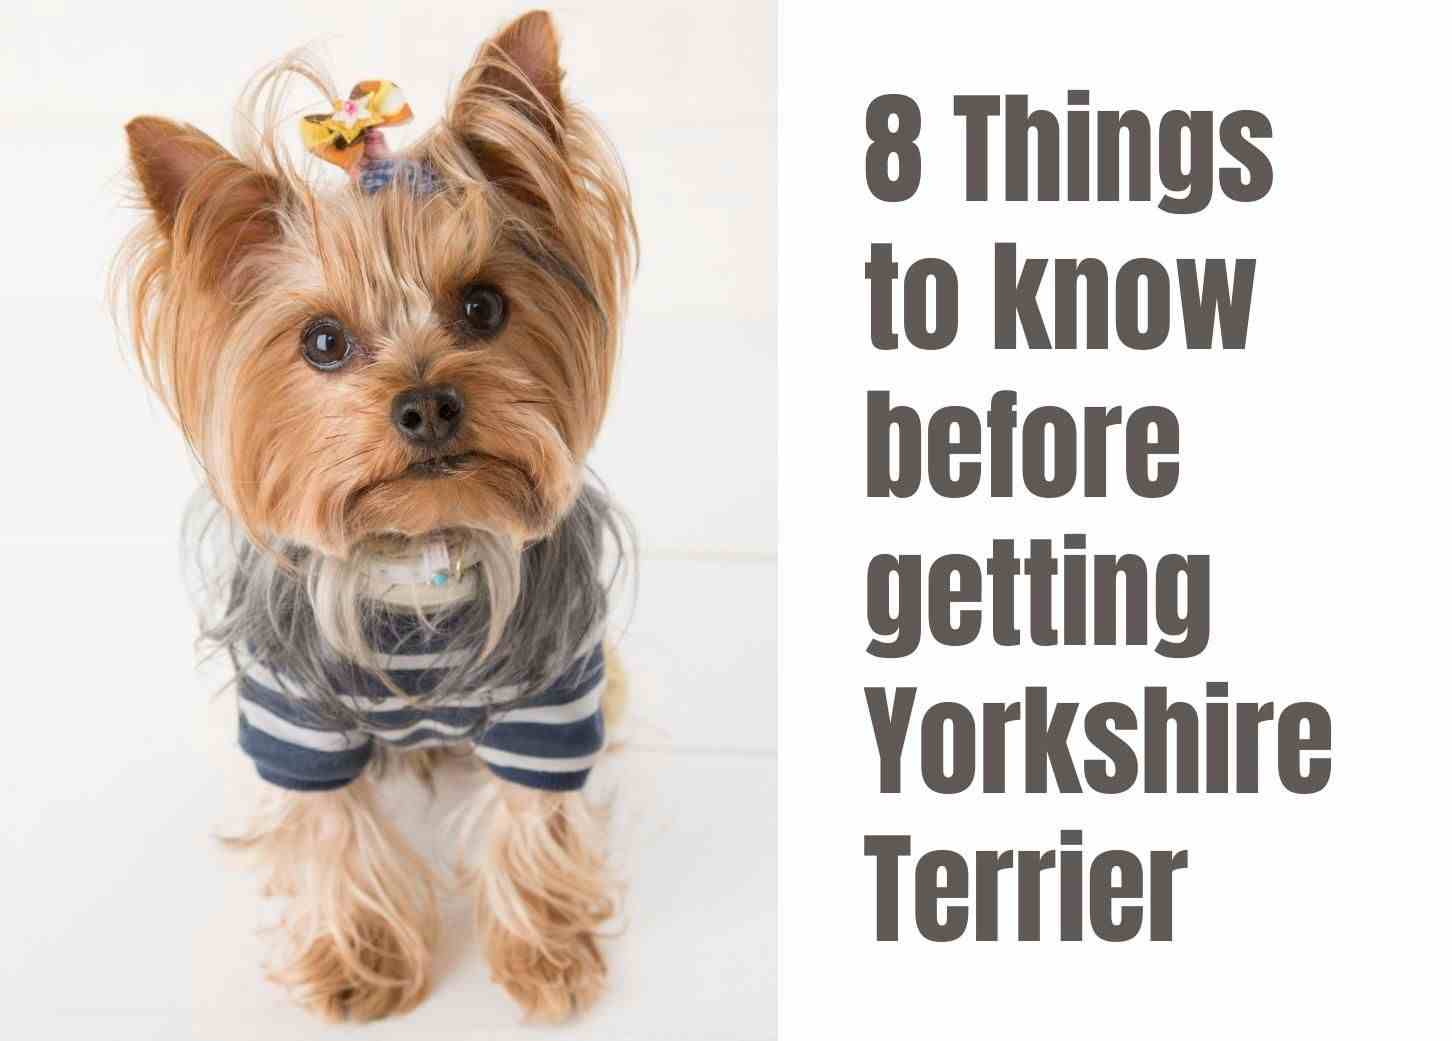 8 Key Facts About Yorkshire Terriers